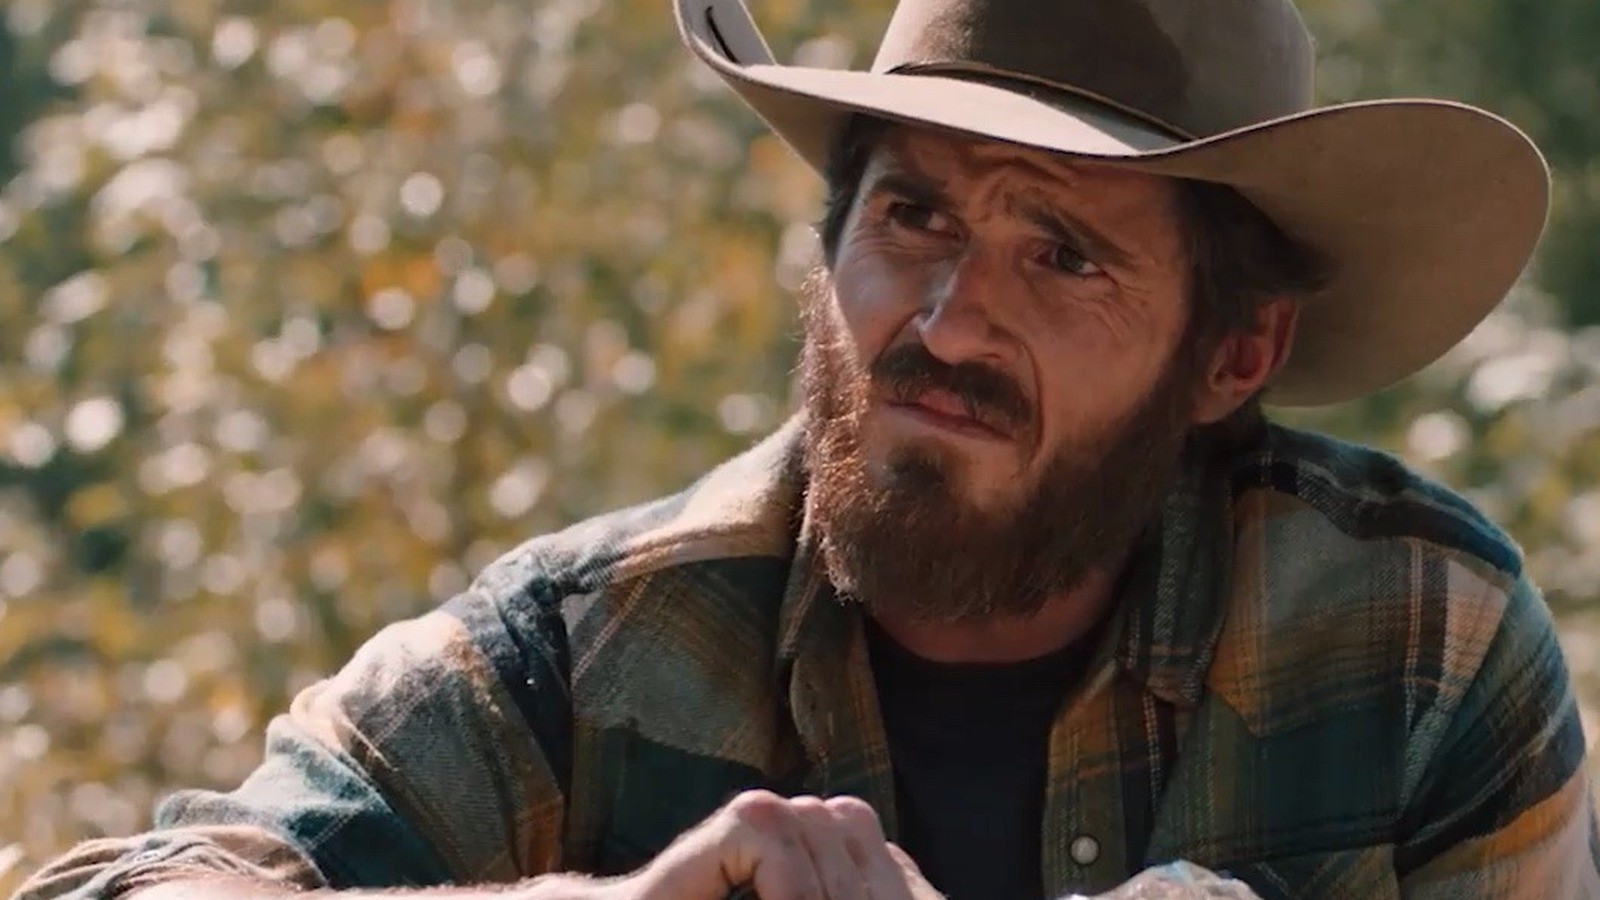 A pensive Lee Dutton in a still from Yellowstone